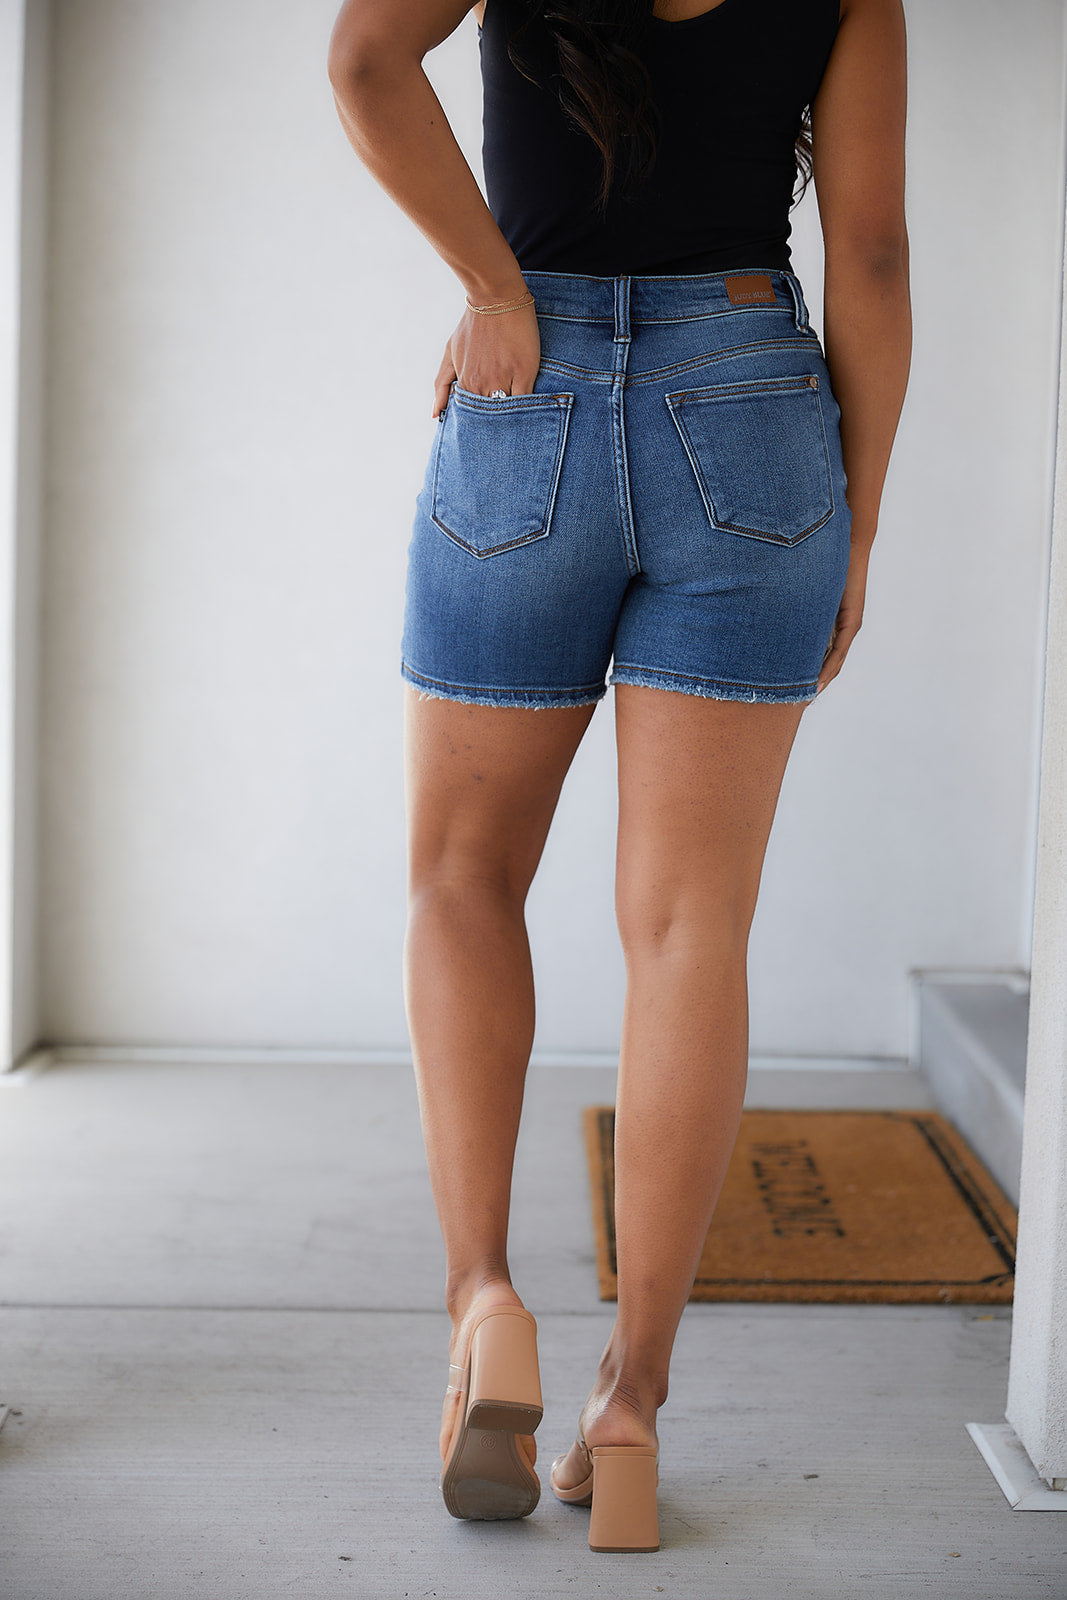 Women Casual Denim Shorts Solid High Waisted 4 Buttons Frayed Raw Hem  Ripped Stretch Jeans Summer Distressed Shorts(L,A Black) - Walmart.com